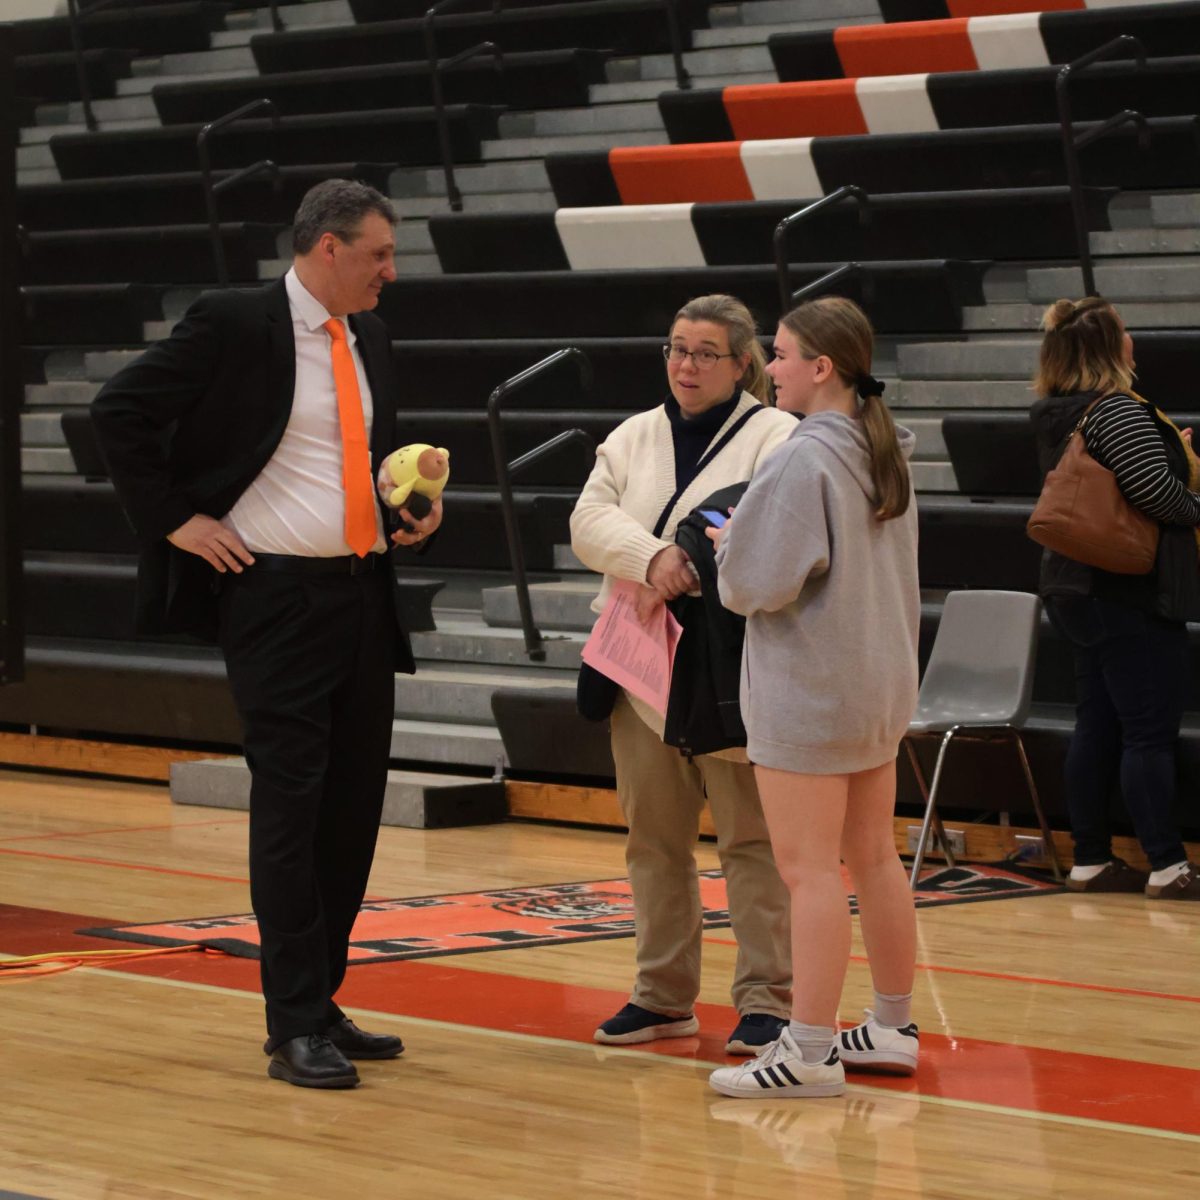 Helping a student, Principle Michael Bakker meets an incoming eighth grader. On Feb. 5, Fenton High School holds their eighth grade transition night.